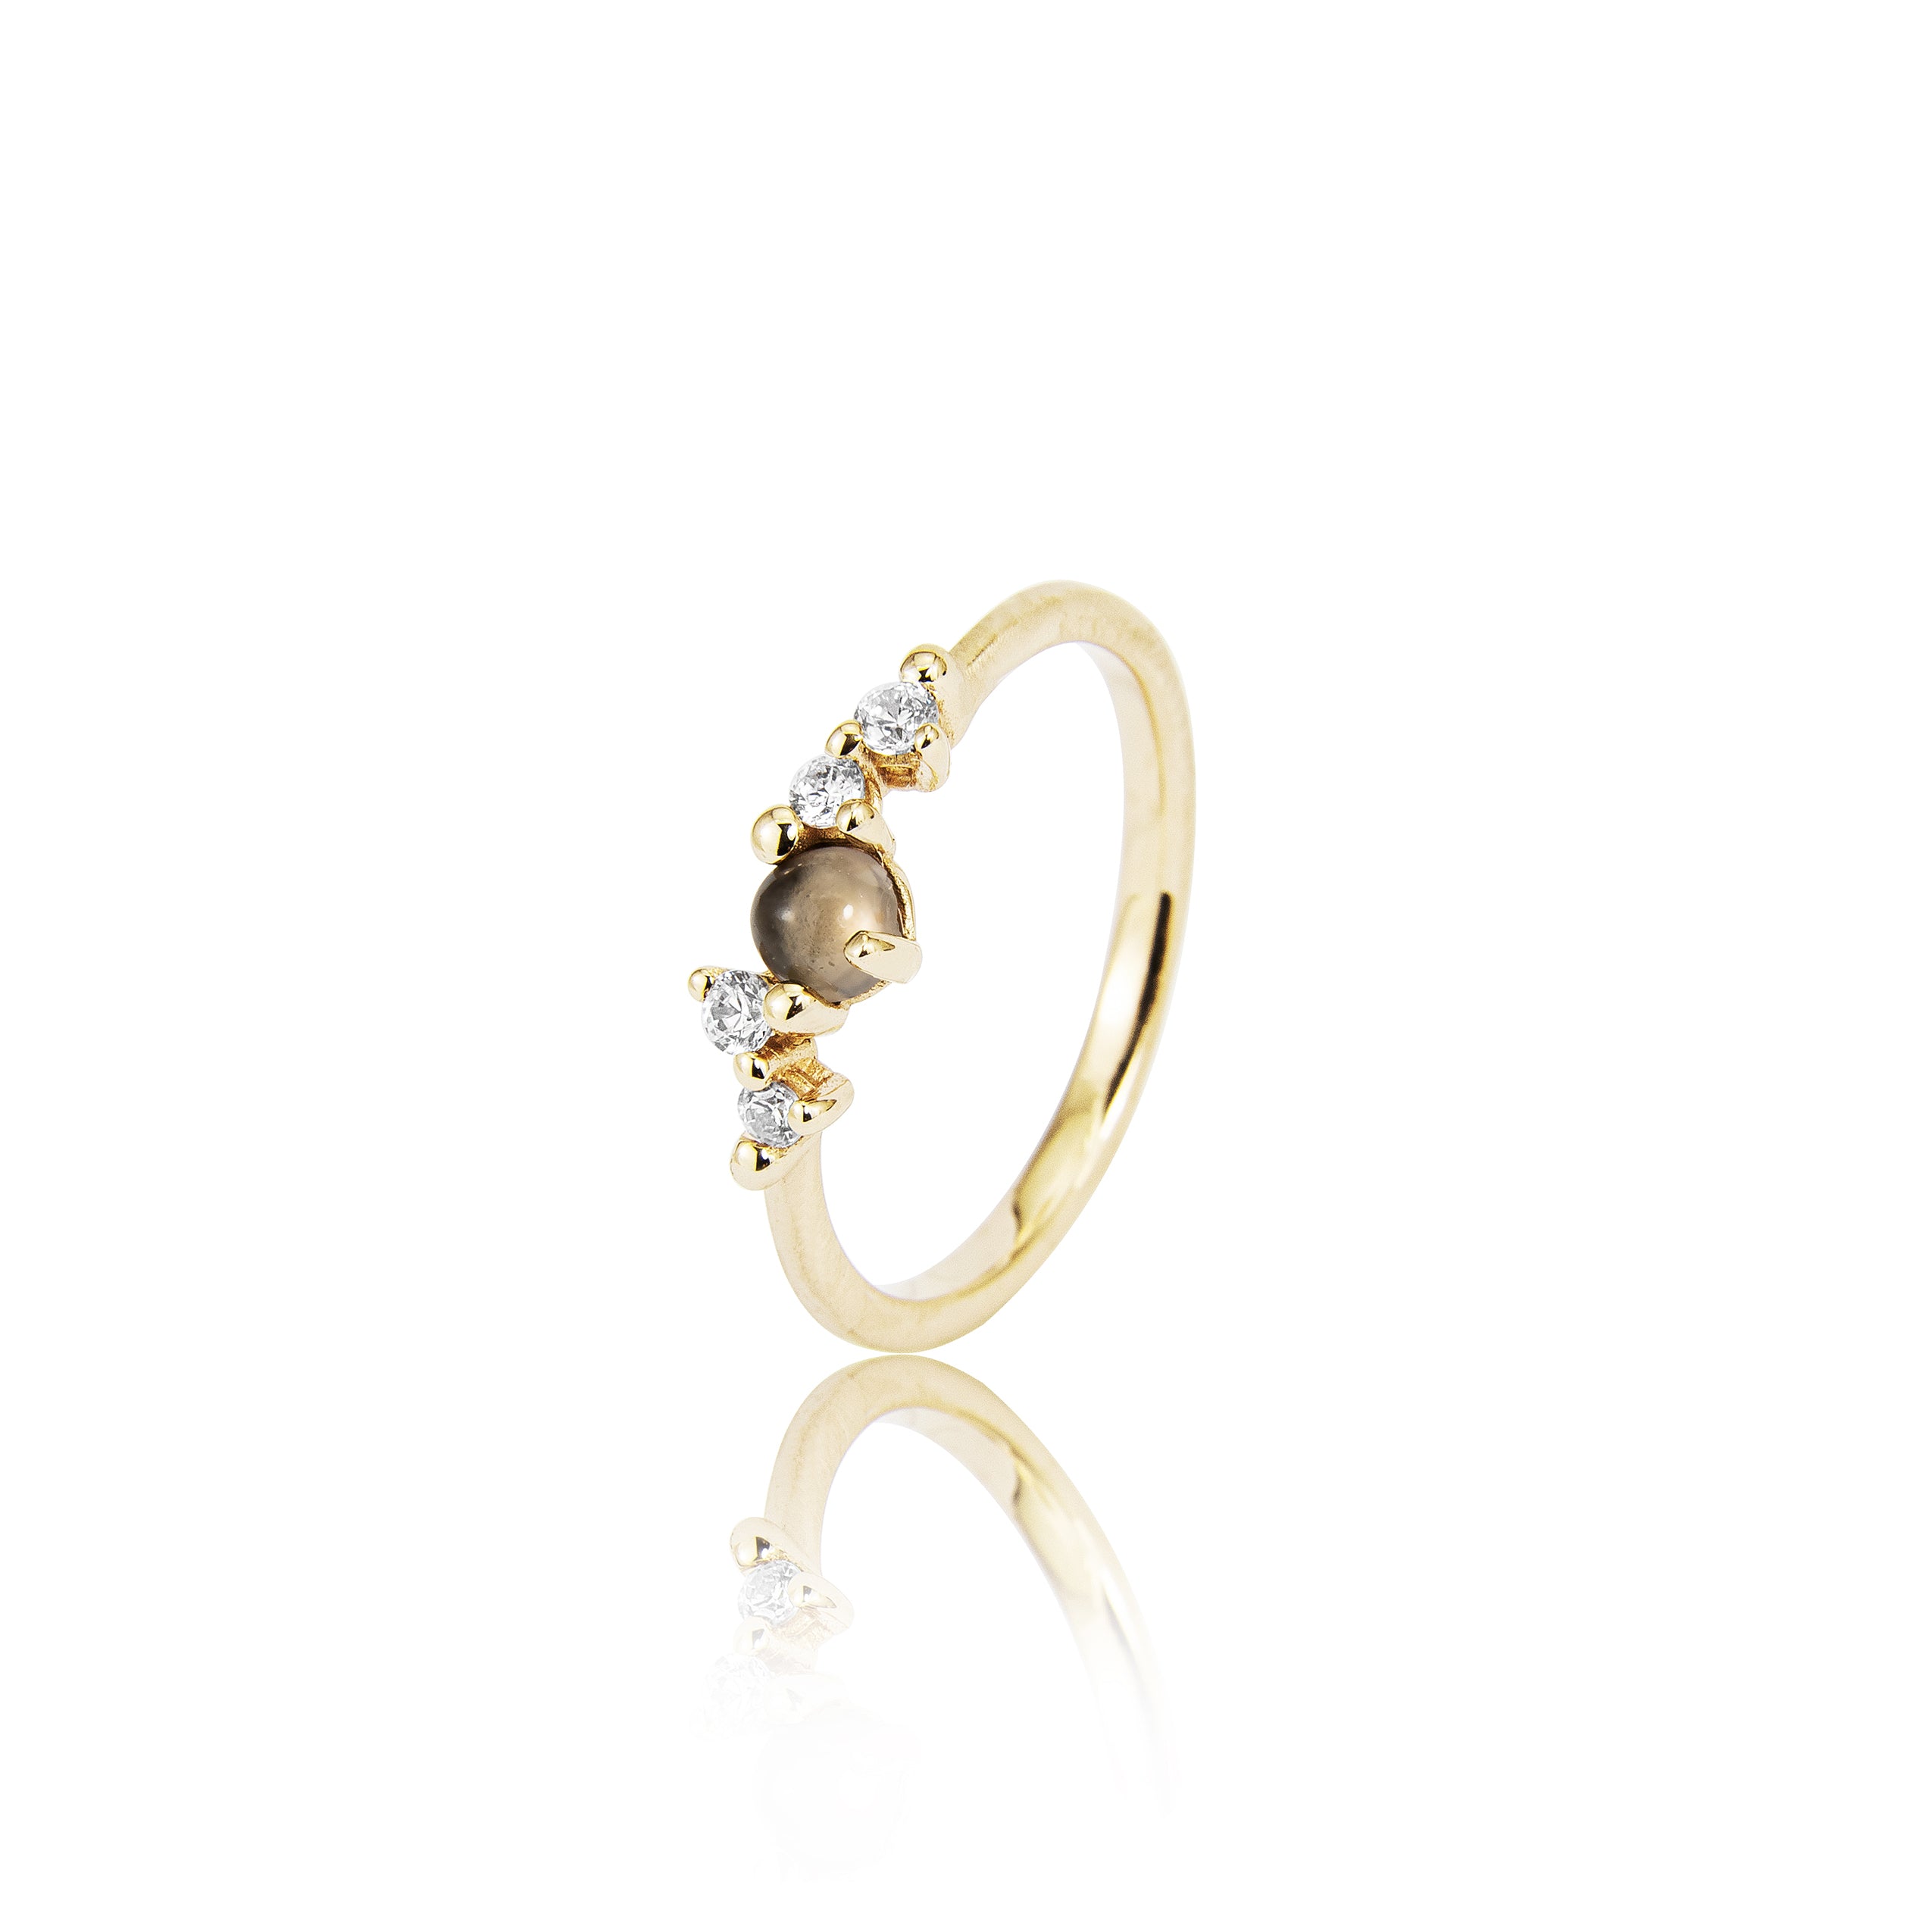 Stellini ring "smal" in 585/- gold with smoky quartz